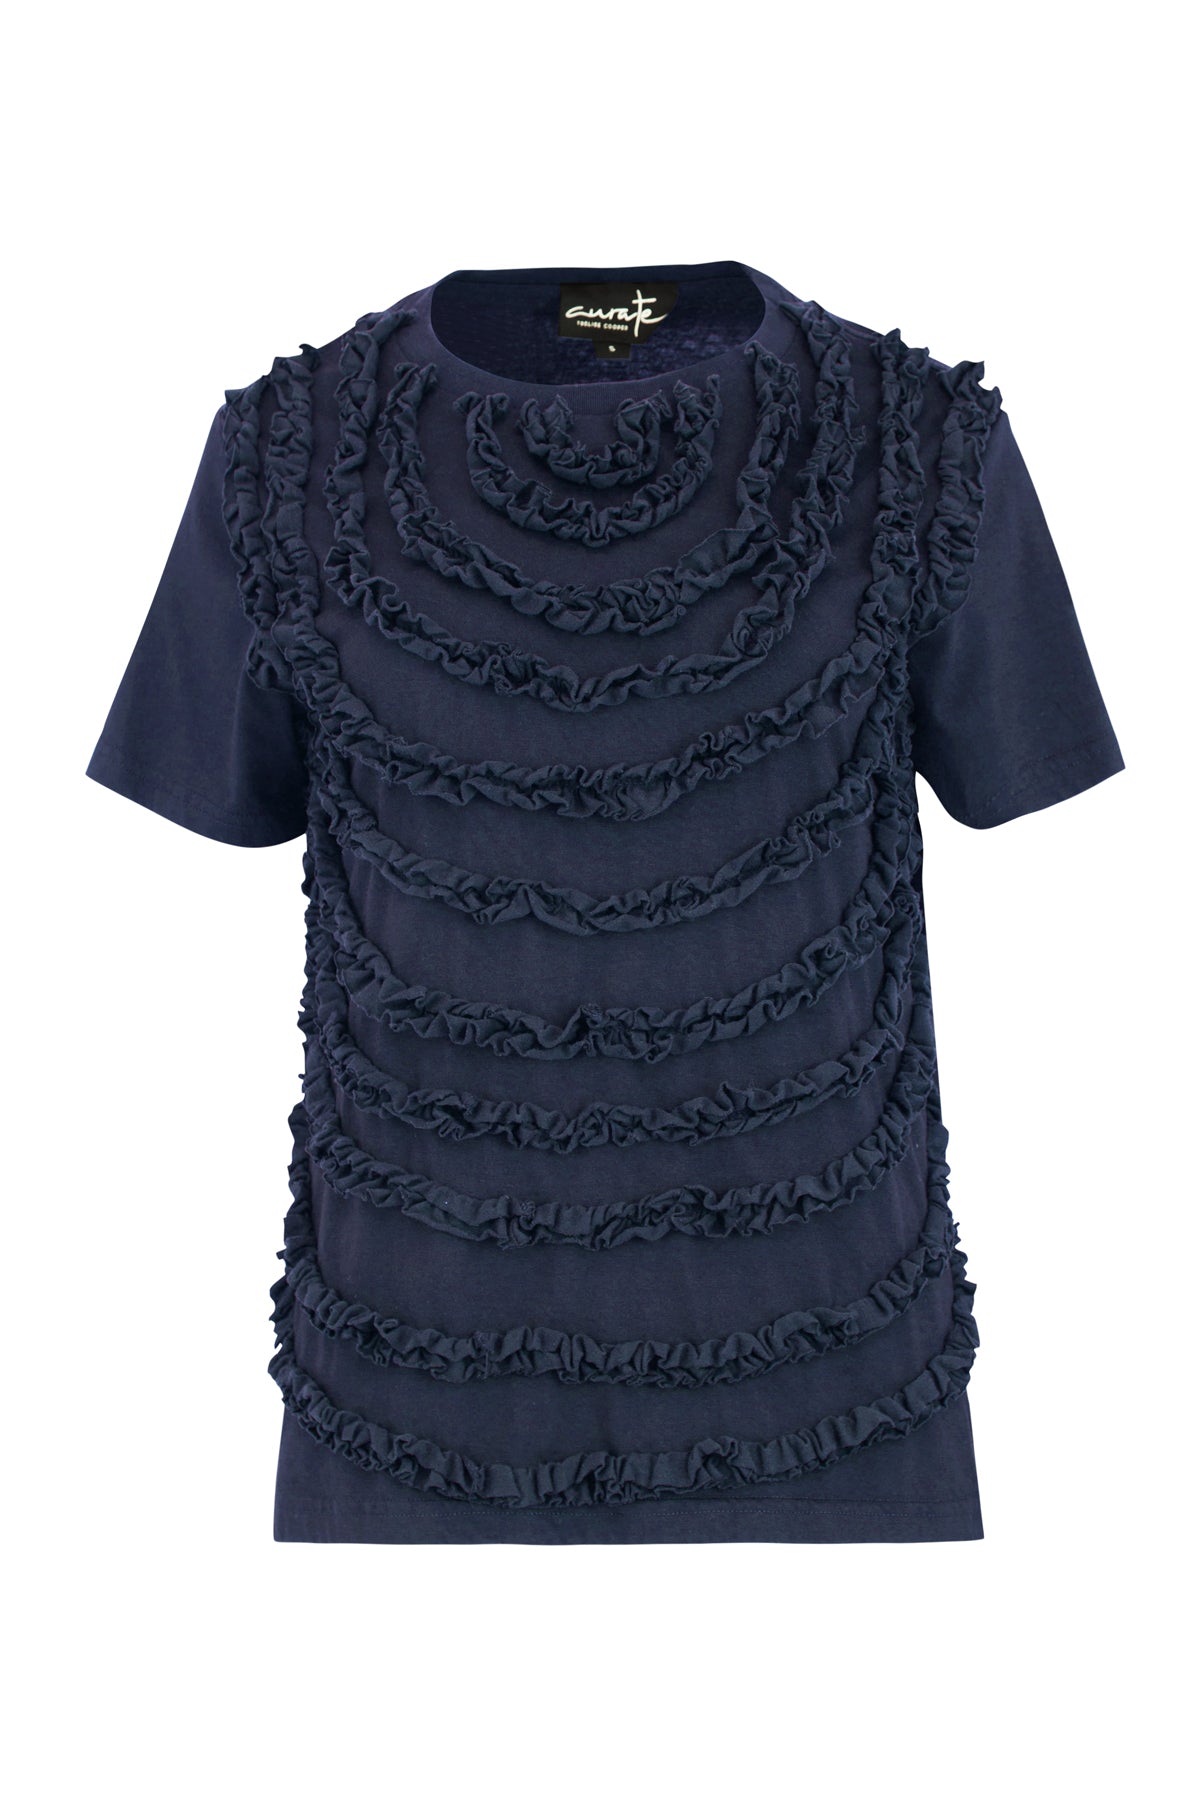 Curate - Ruffle it Up Top - Navy